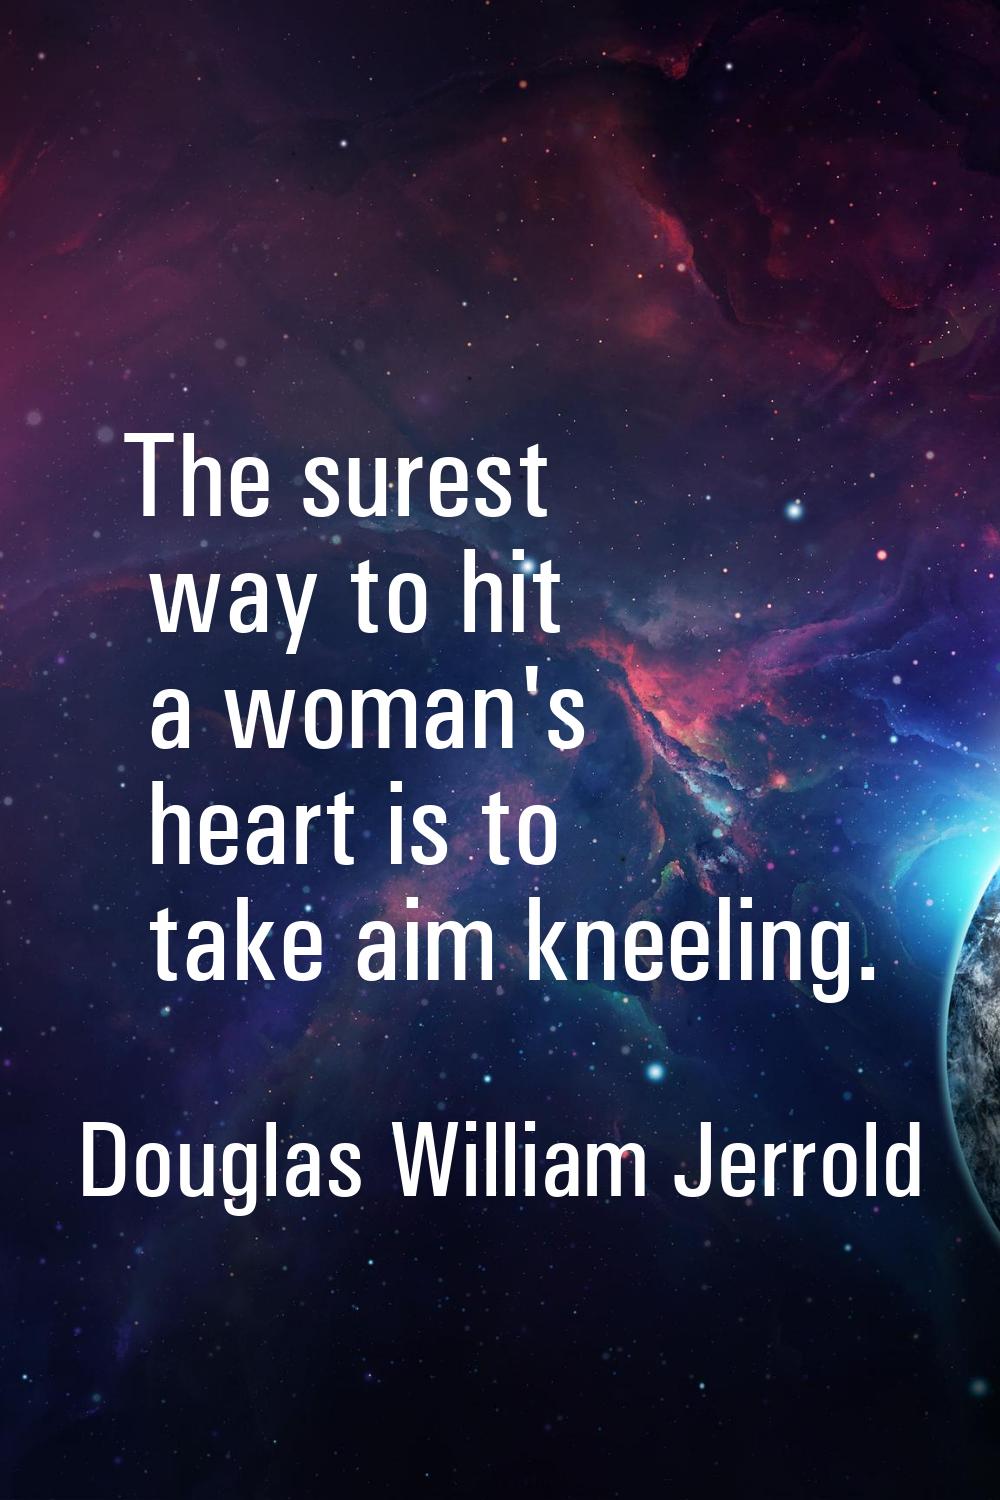 The surest way to hit a woman's heart is to take aim kneeling.